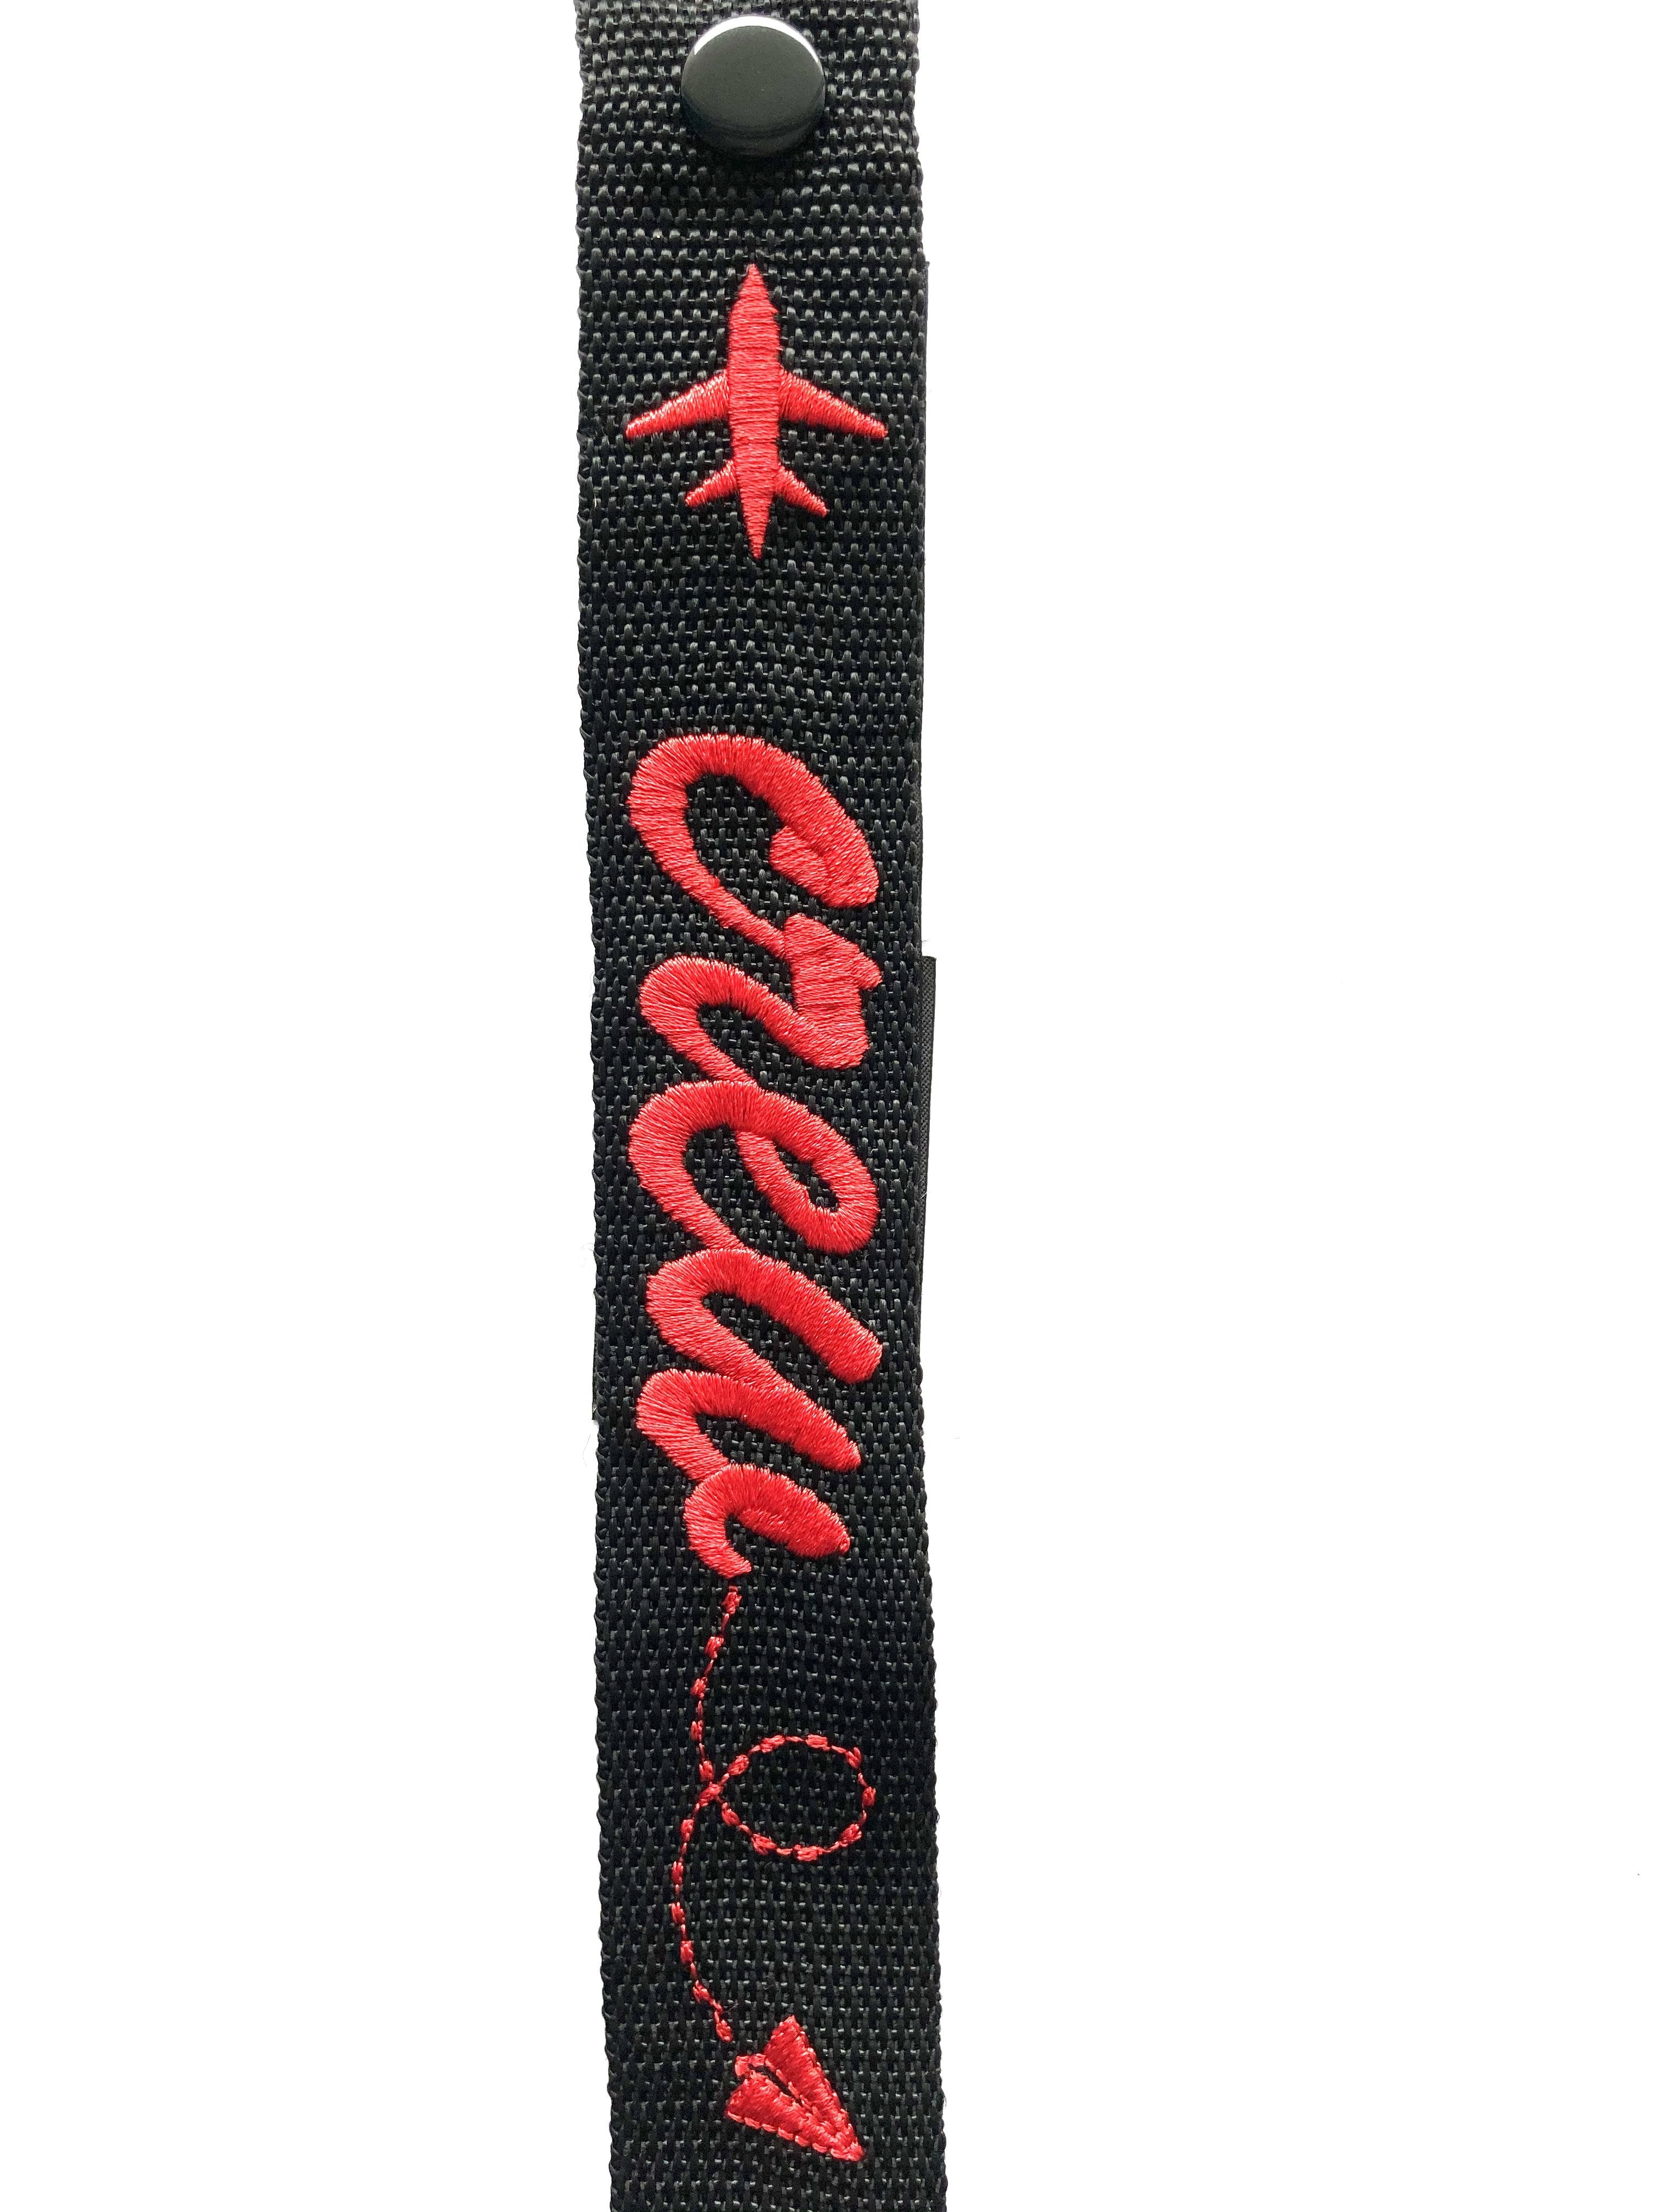 Crew Luggage Tag - RED with airplane